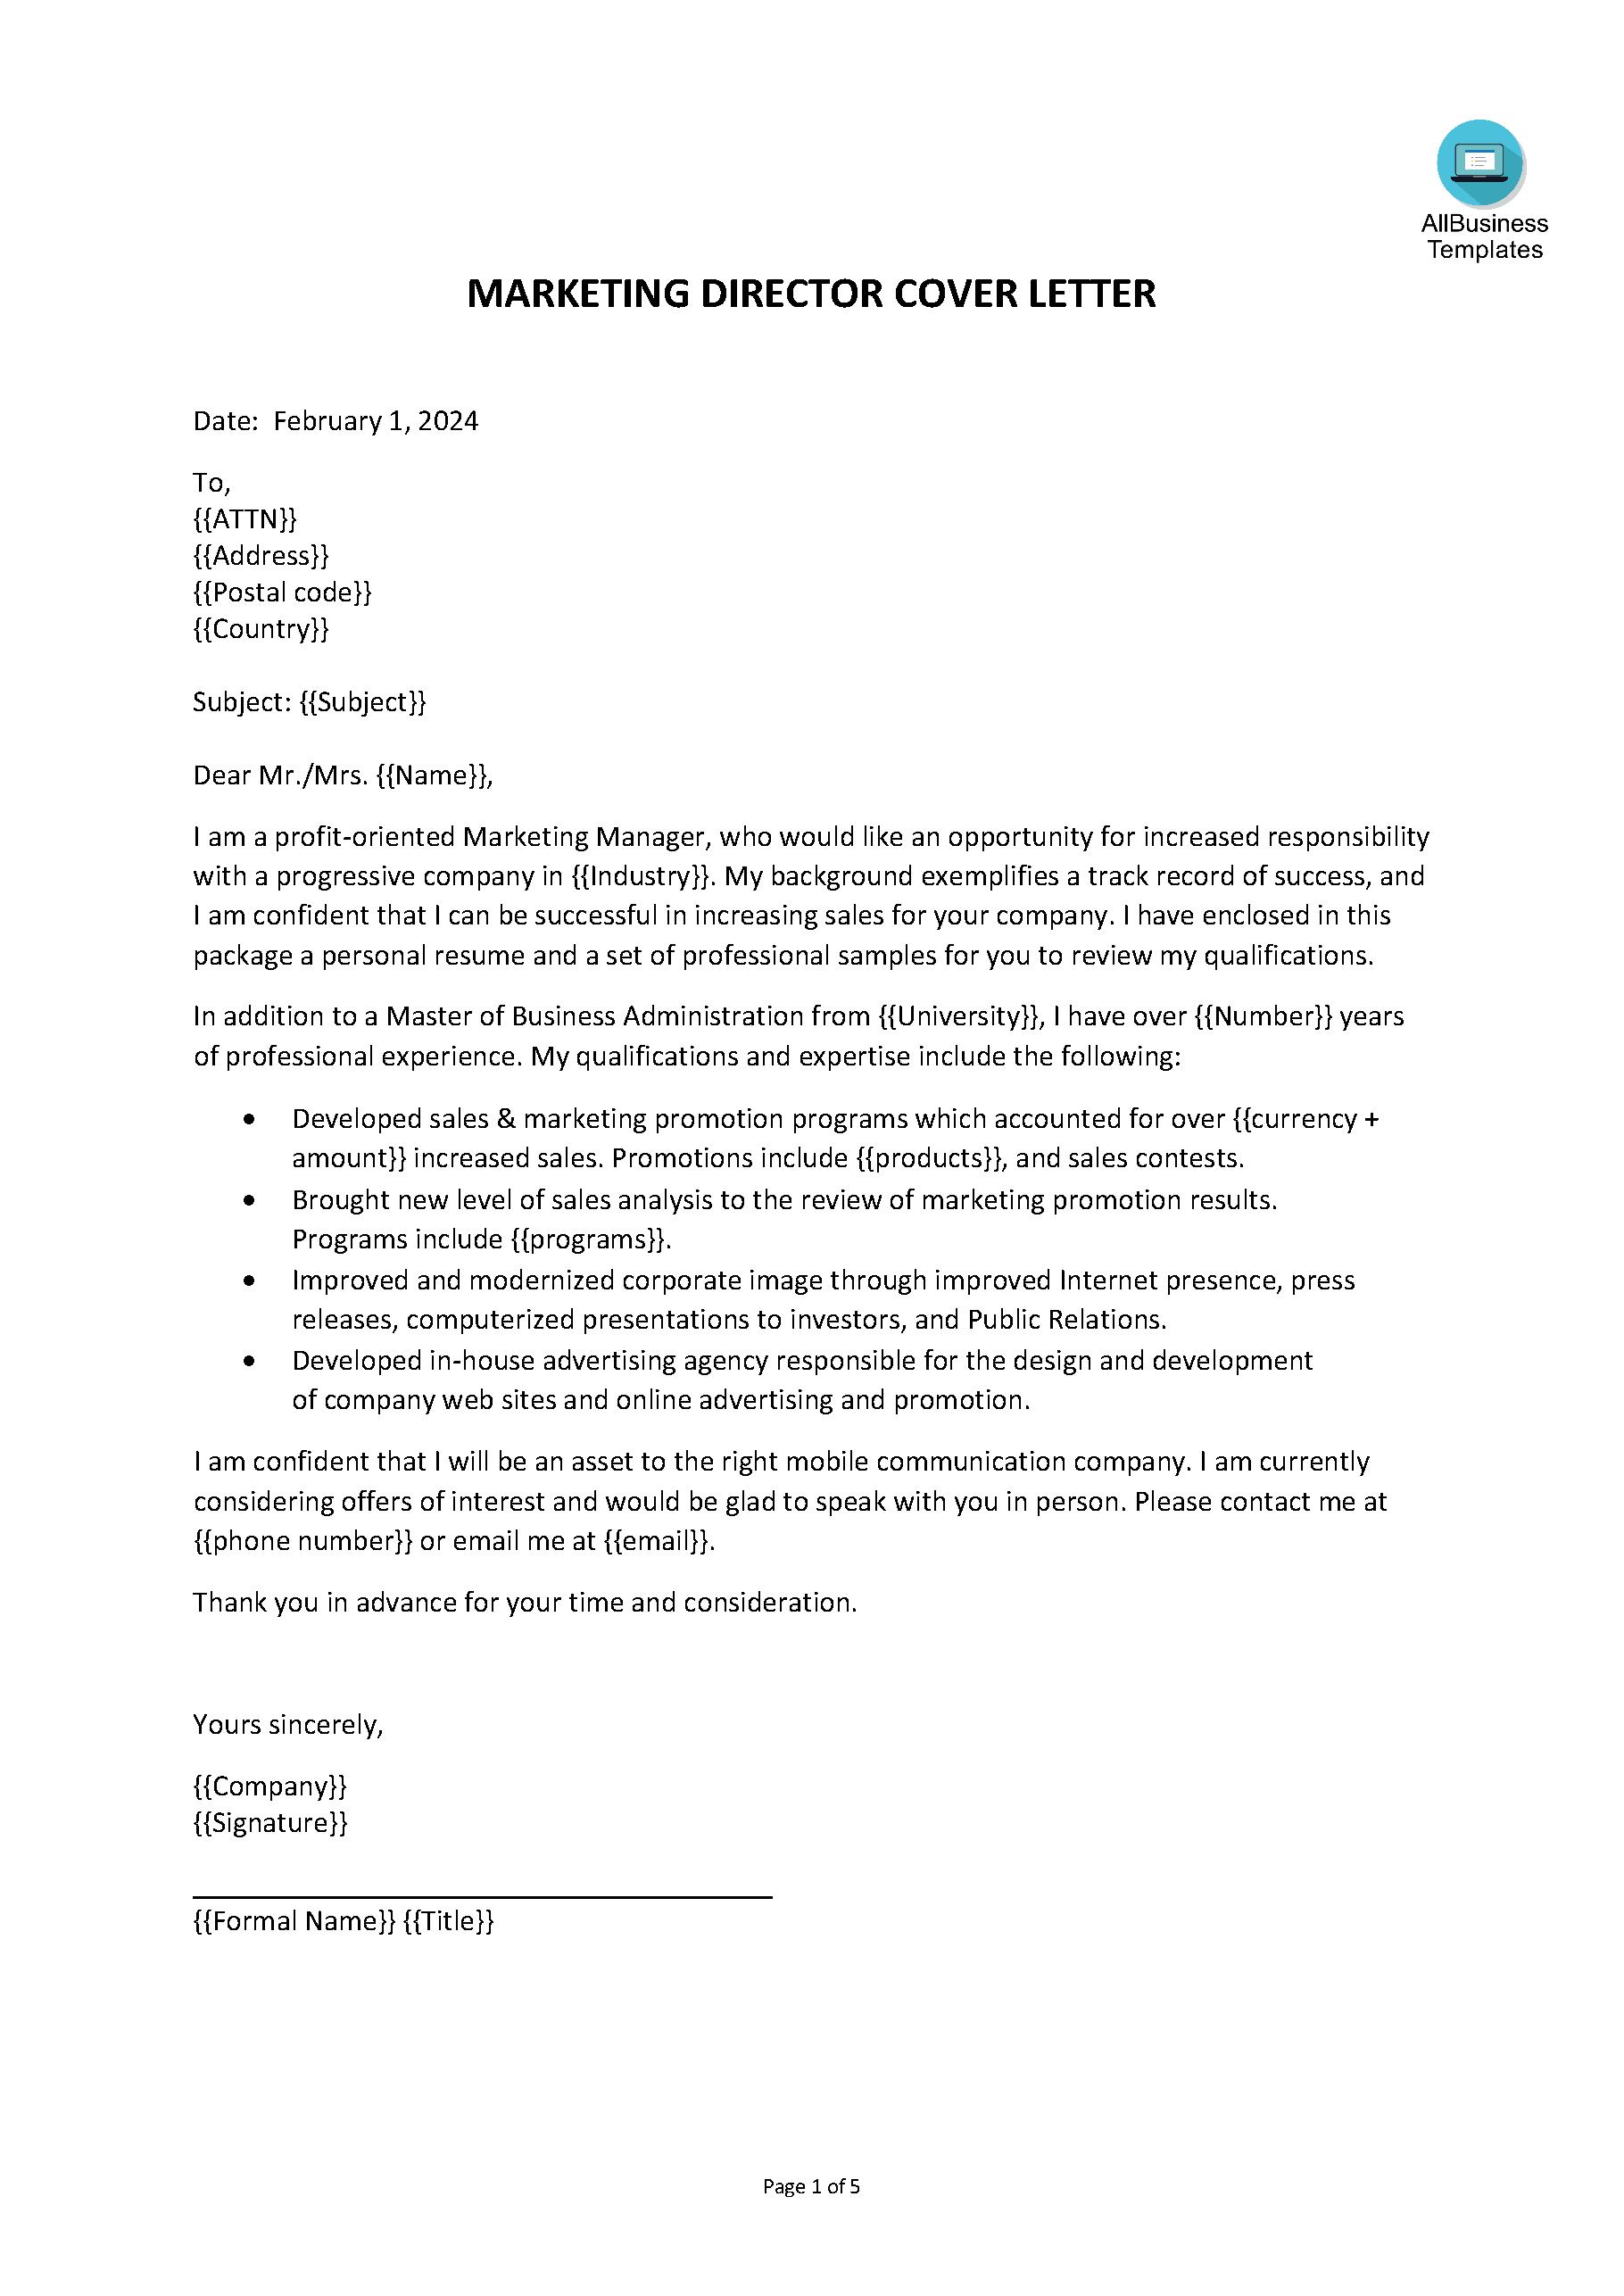 marketing director cover letter template